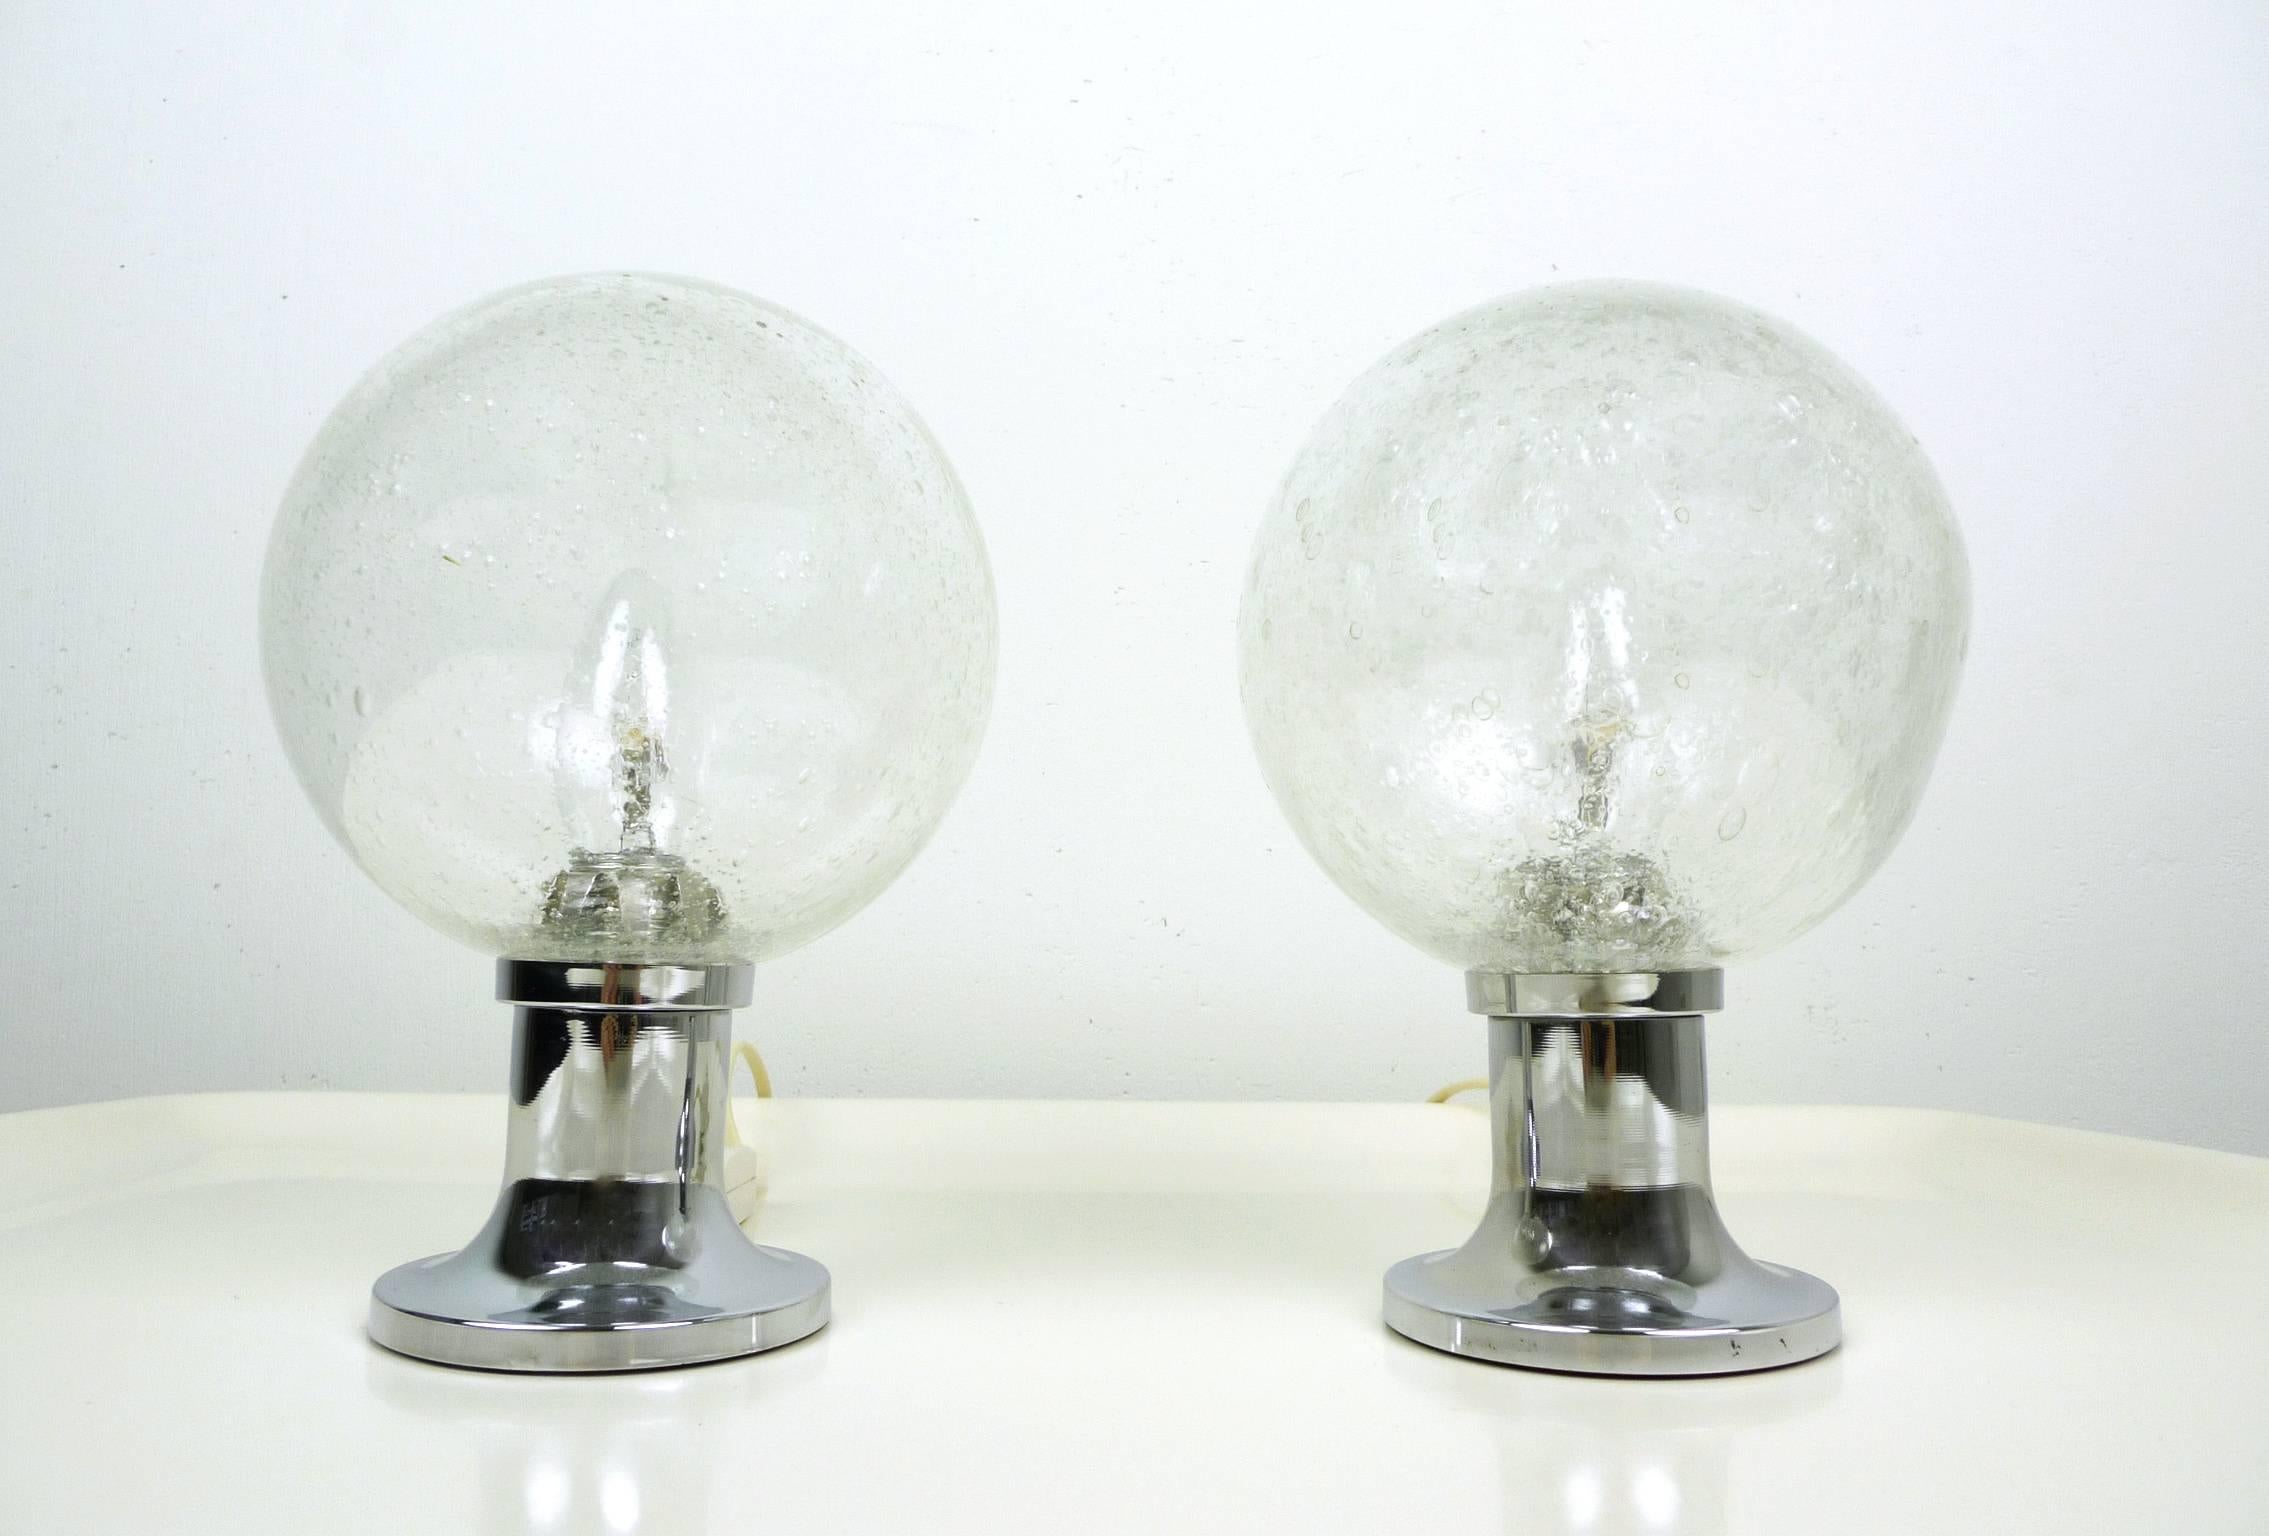 This pair of small table lamps has bubble glass globes and trumpet-shaped metal stands. It was designed by Egon Hillebrand in the 1960s and was manufactured by his company Hillebrand Leuchten in Germany. Both lights are in a very good original